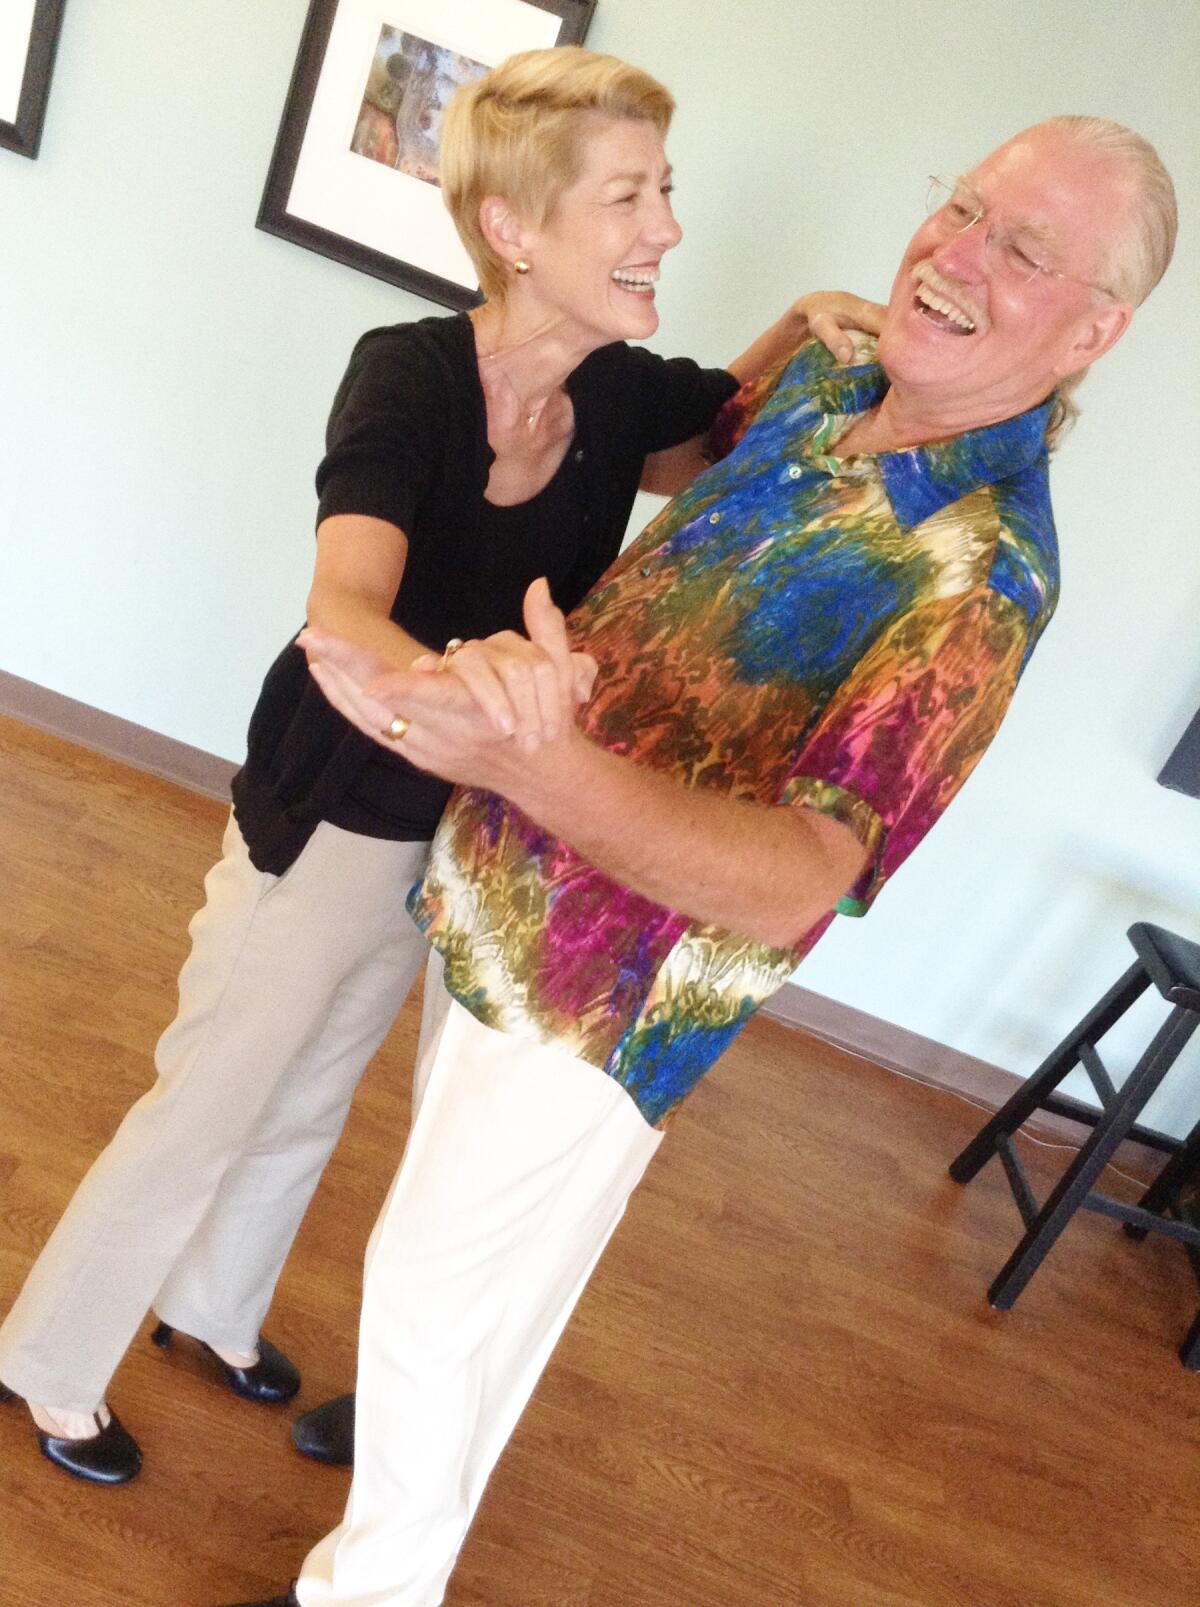 Jim and Imozelle McVeigh taking private dance lessons from Dancing Together studio in Pacific Beach.